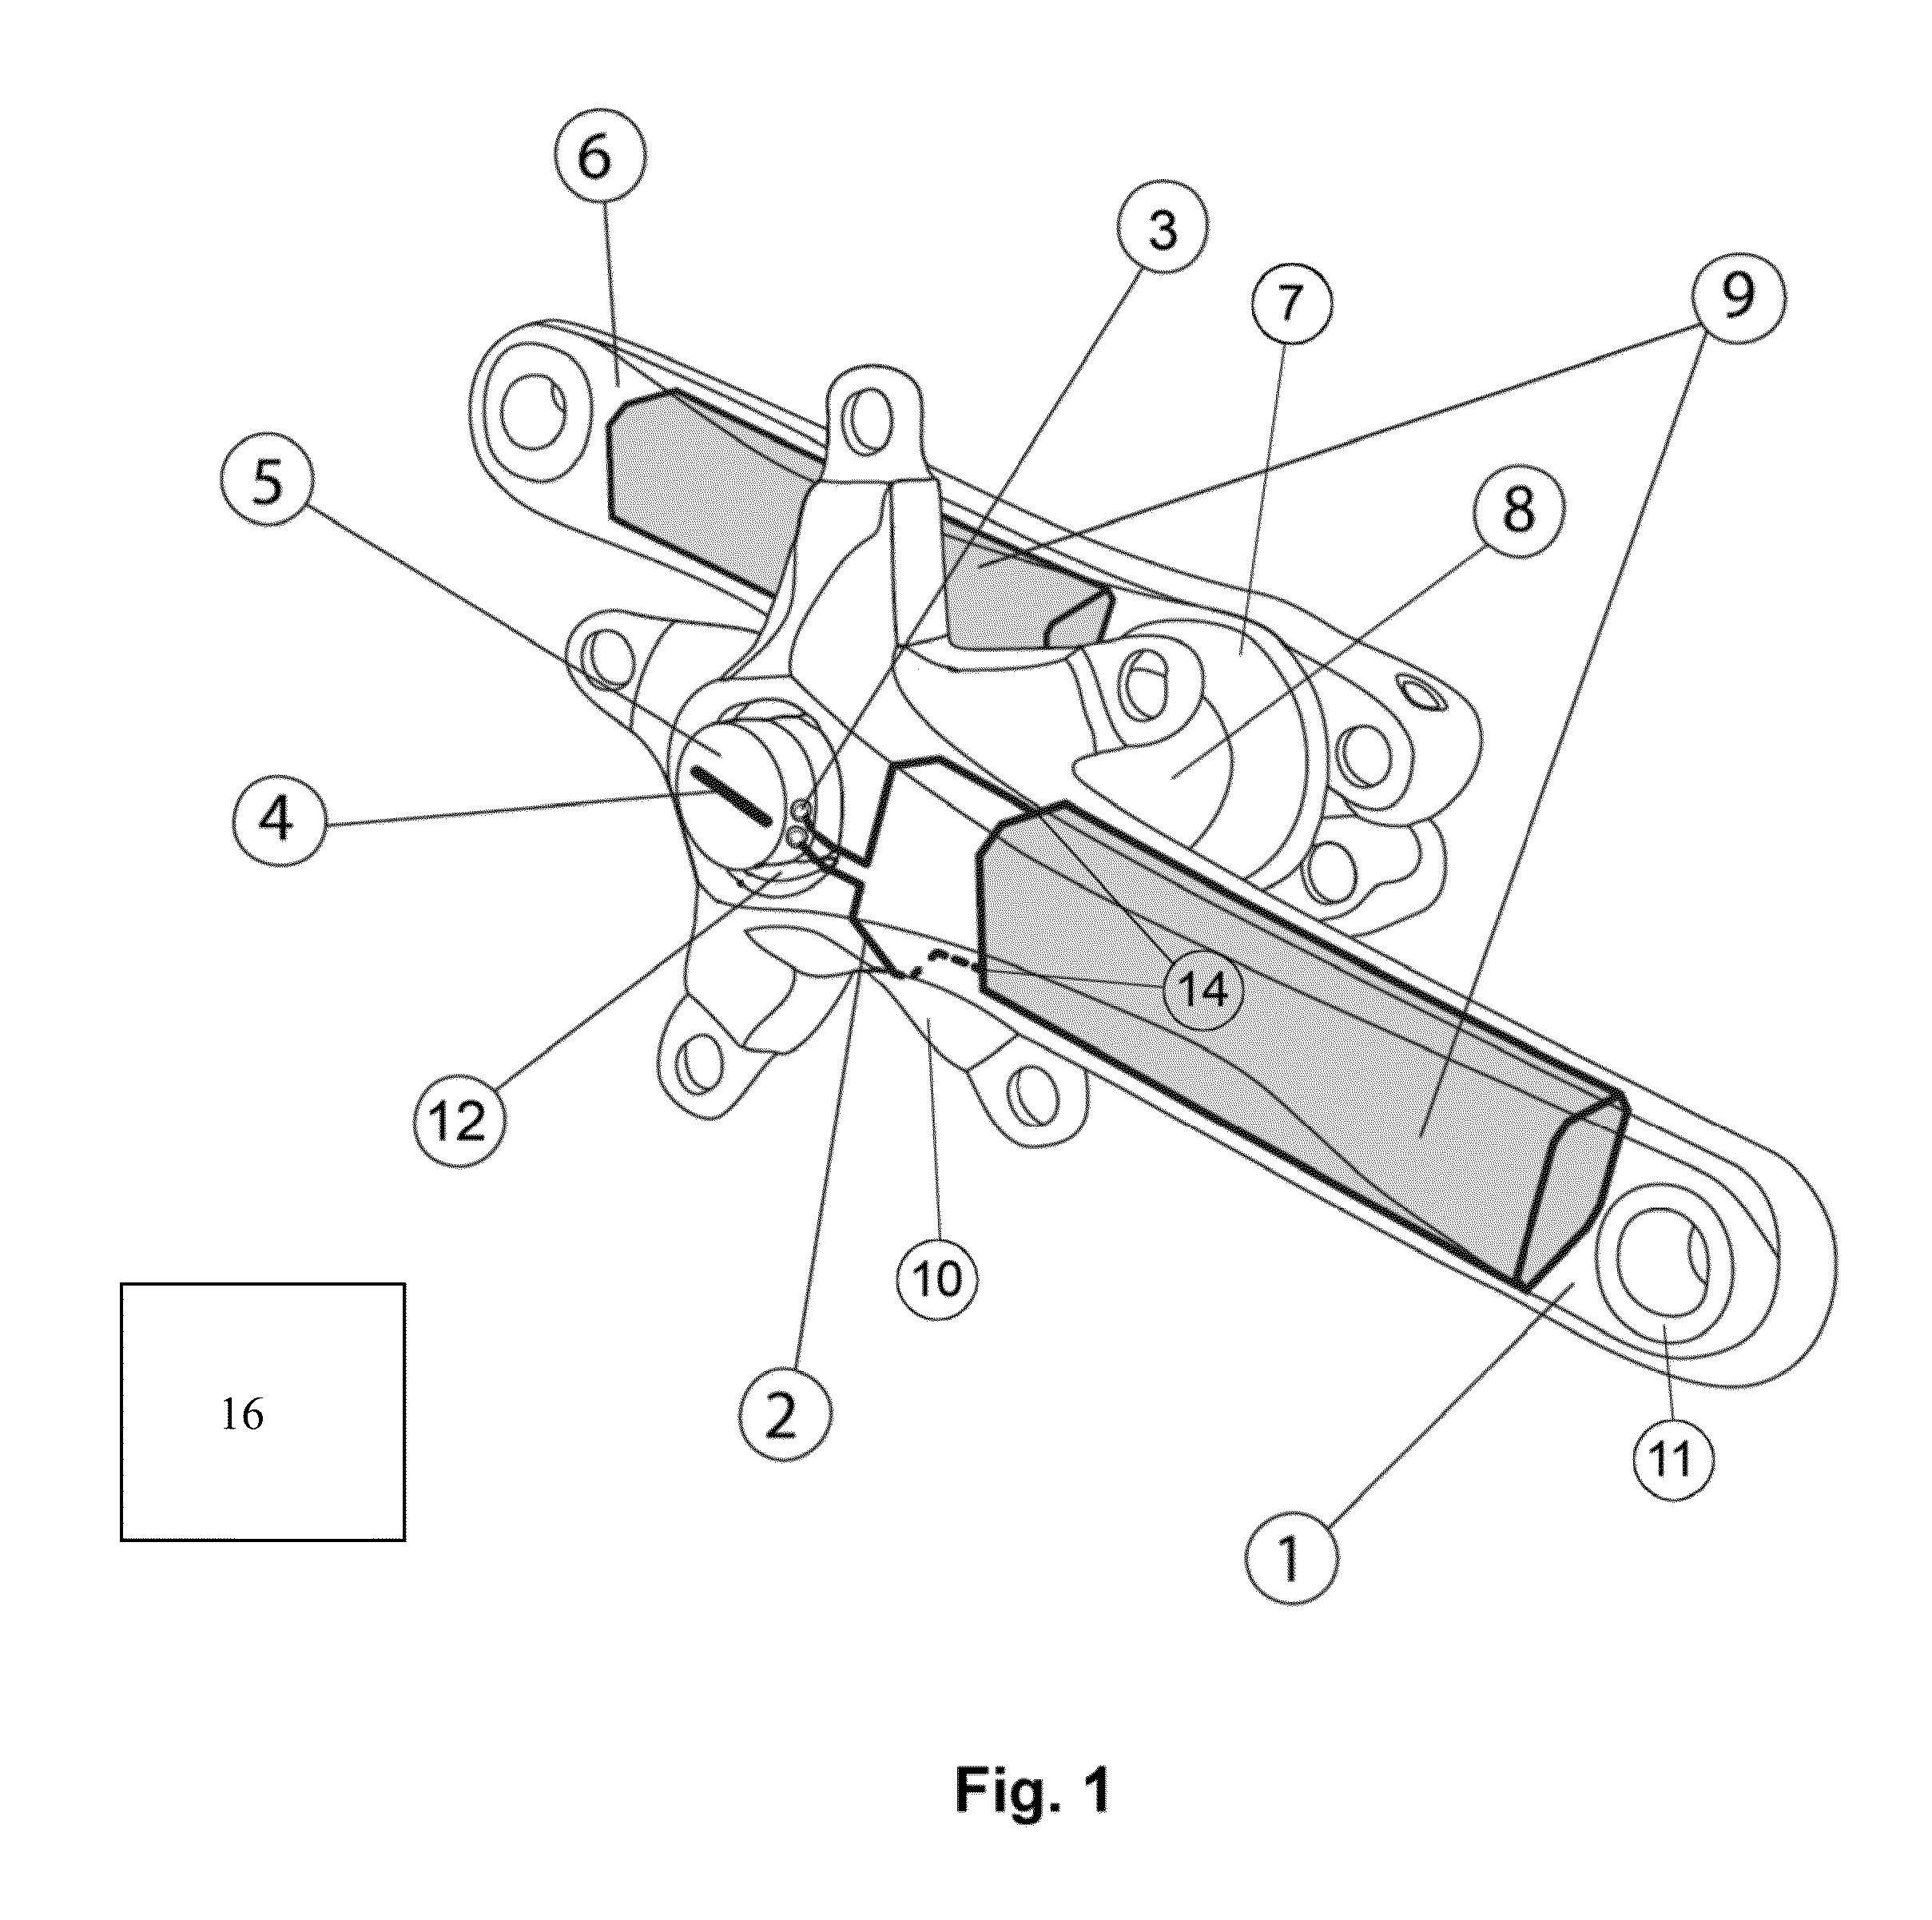 Crank arm, crankset, and power measuring device for an at least partially human powered vehicle or training device with a crank drive